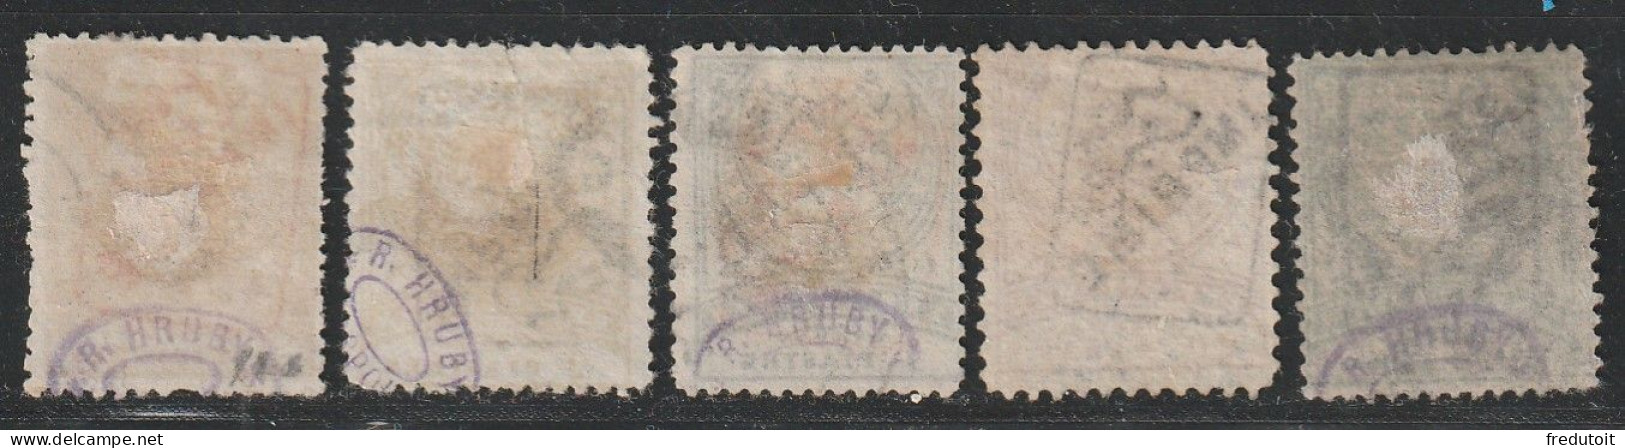 TURQUIE - Timbres Pour Journaux : N°2/6 Obl (1891) - Newspaper Stamps